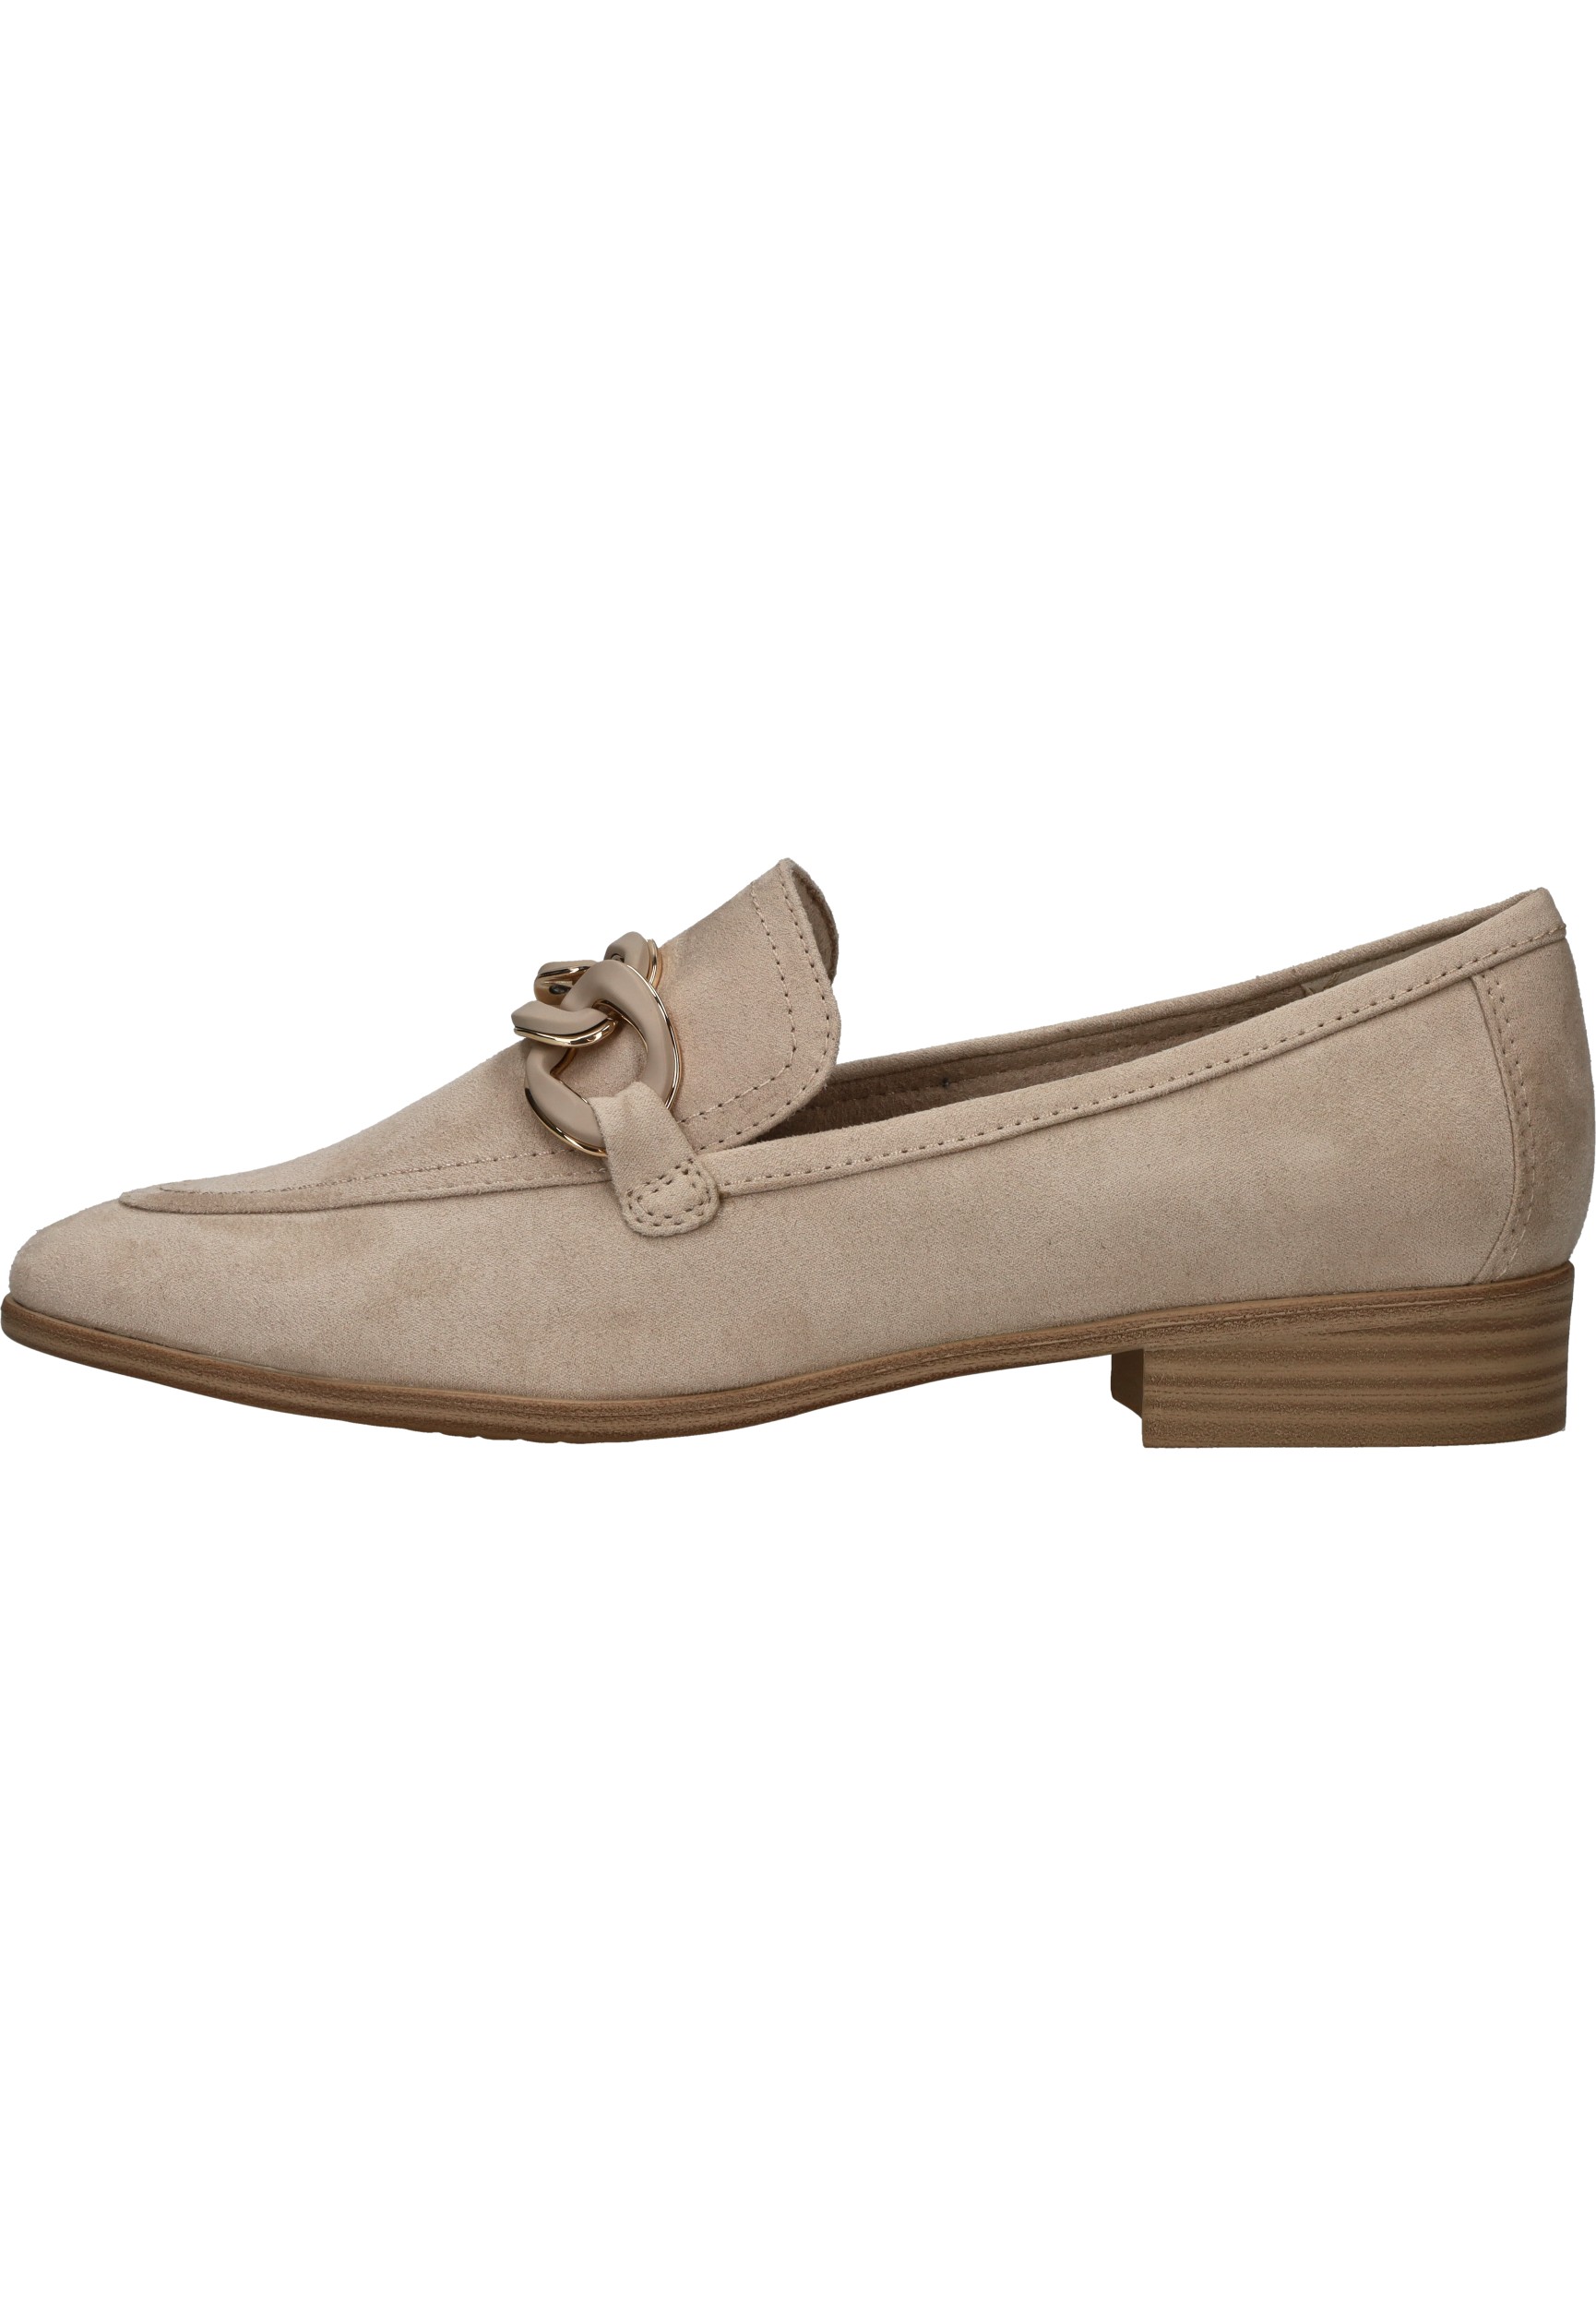 MARCO TOZZI MT Soft Lining + Feel Me - insole Dames Slippers - DUNE - Maat 39